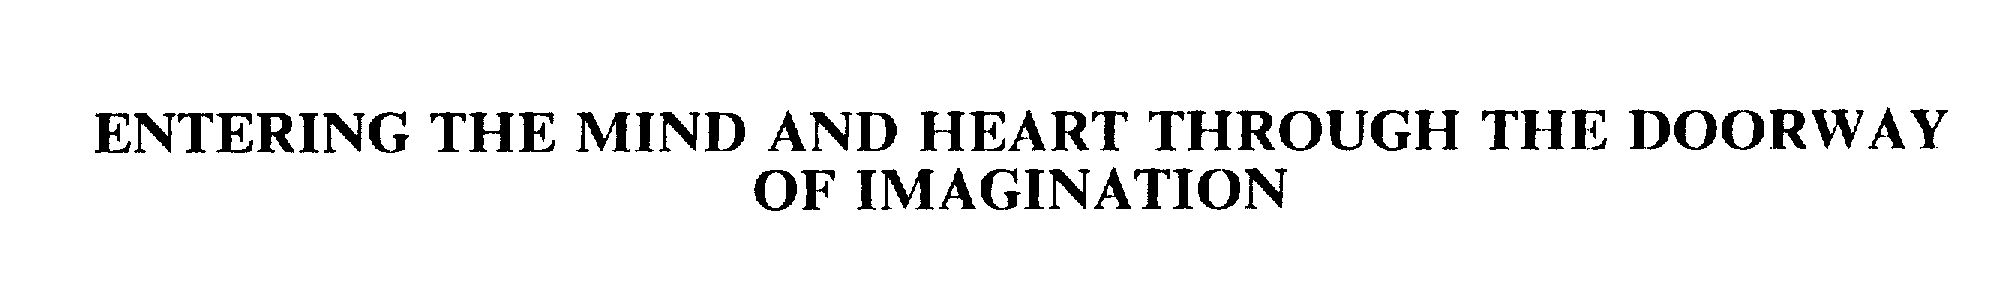 Trademark Logo ENTERING THE MIND AND HEART THROUGH THE DOORWAY OF IMAGINATION